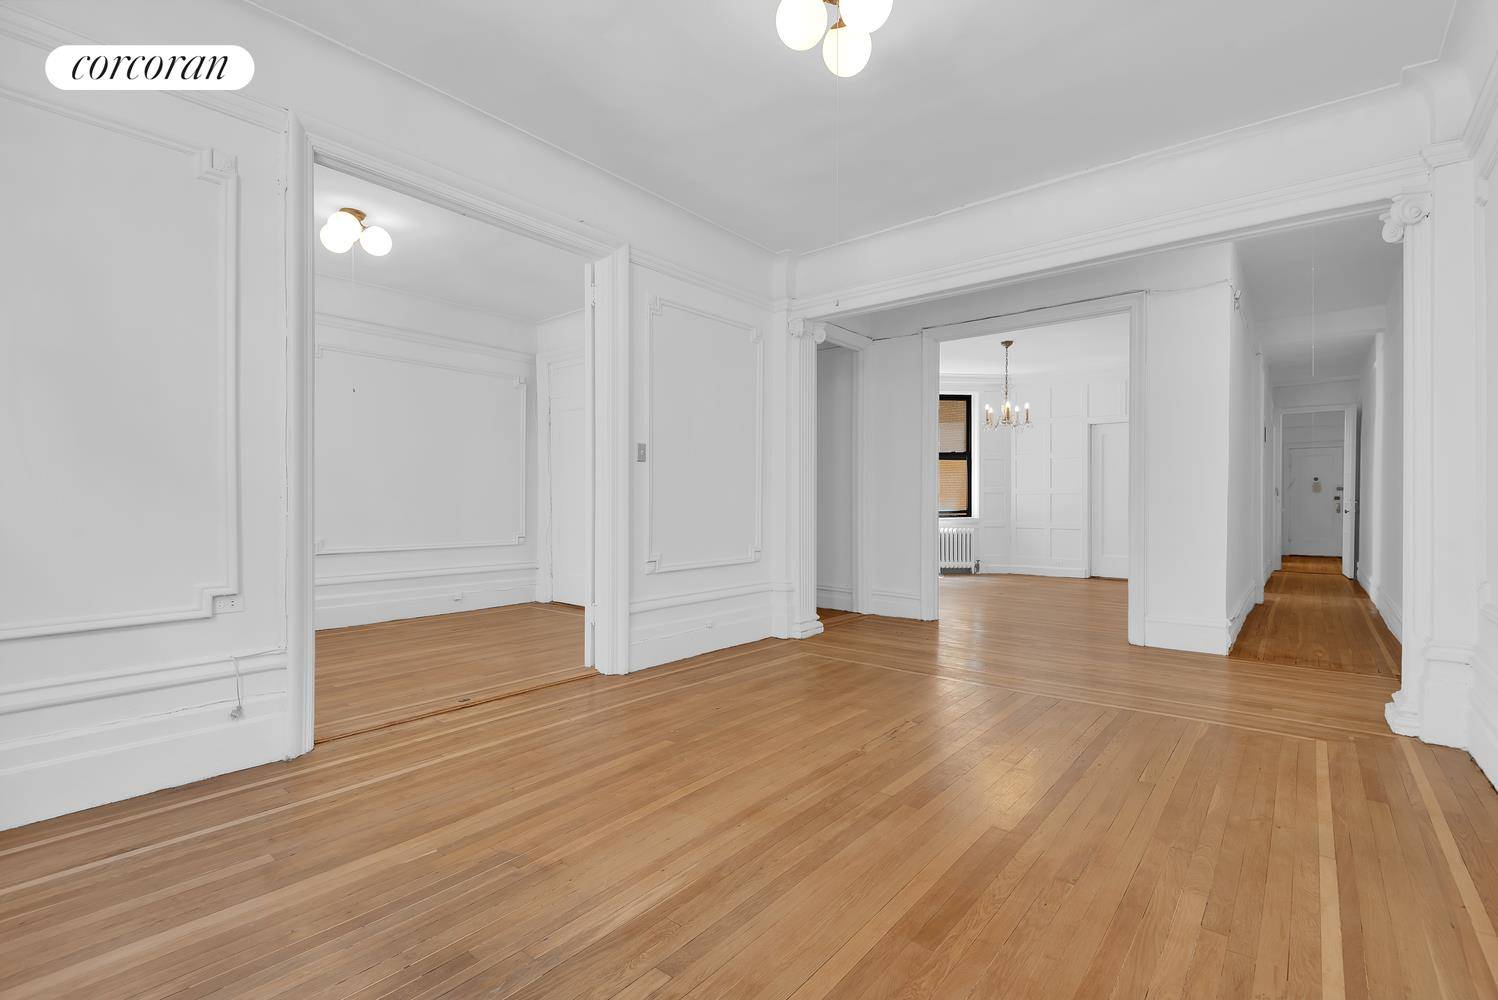 Apartment 57 at Amele Hall offers an amazing opportunity to create a fabulous 3 bedroom, 2 bathroom home home office that recalls the elegance, grand scale, and pretty architectural details ...